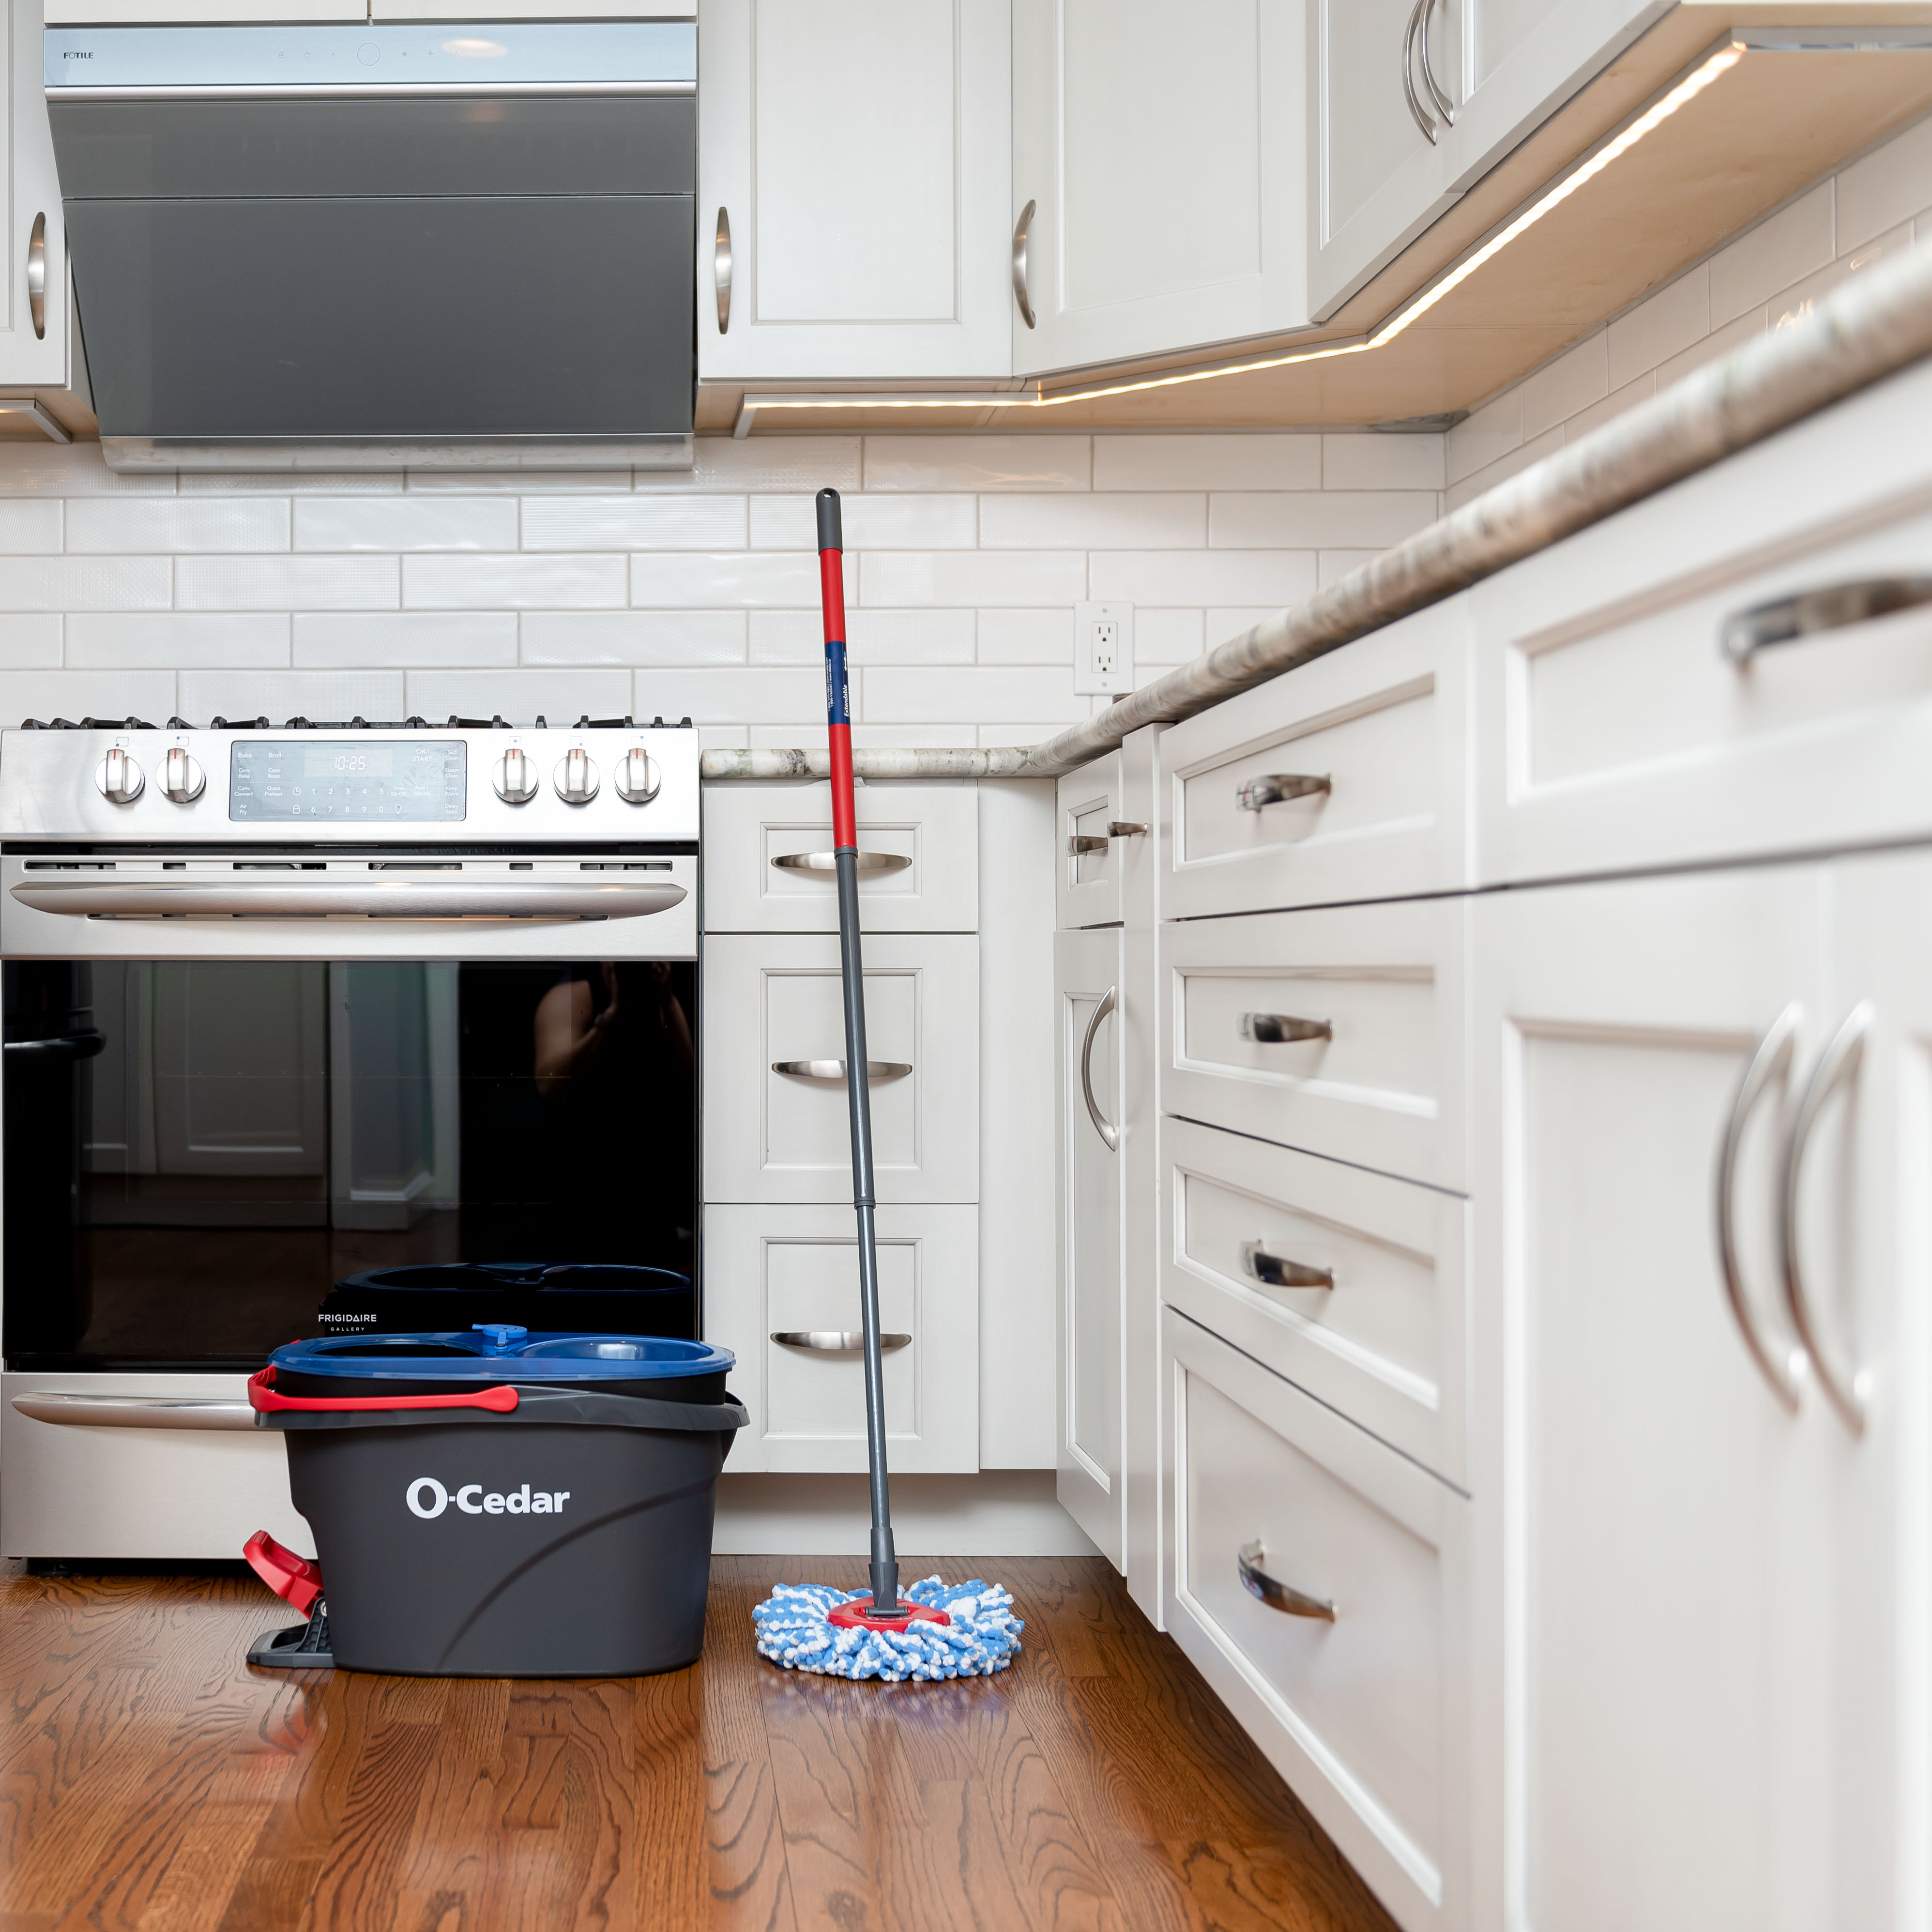 O-Cedar EasyWring RinseClean Spin Mop and Bucket System, Hands-Free System - image 17 of 25